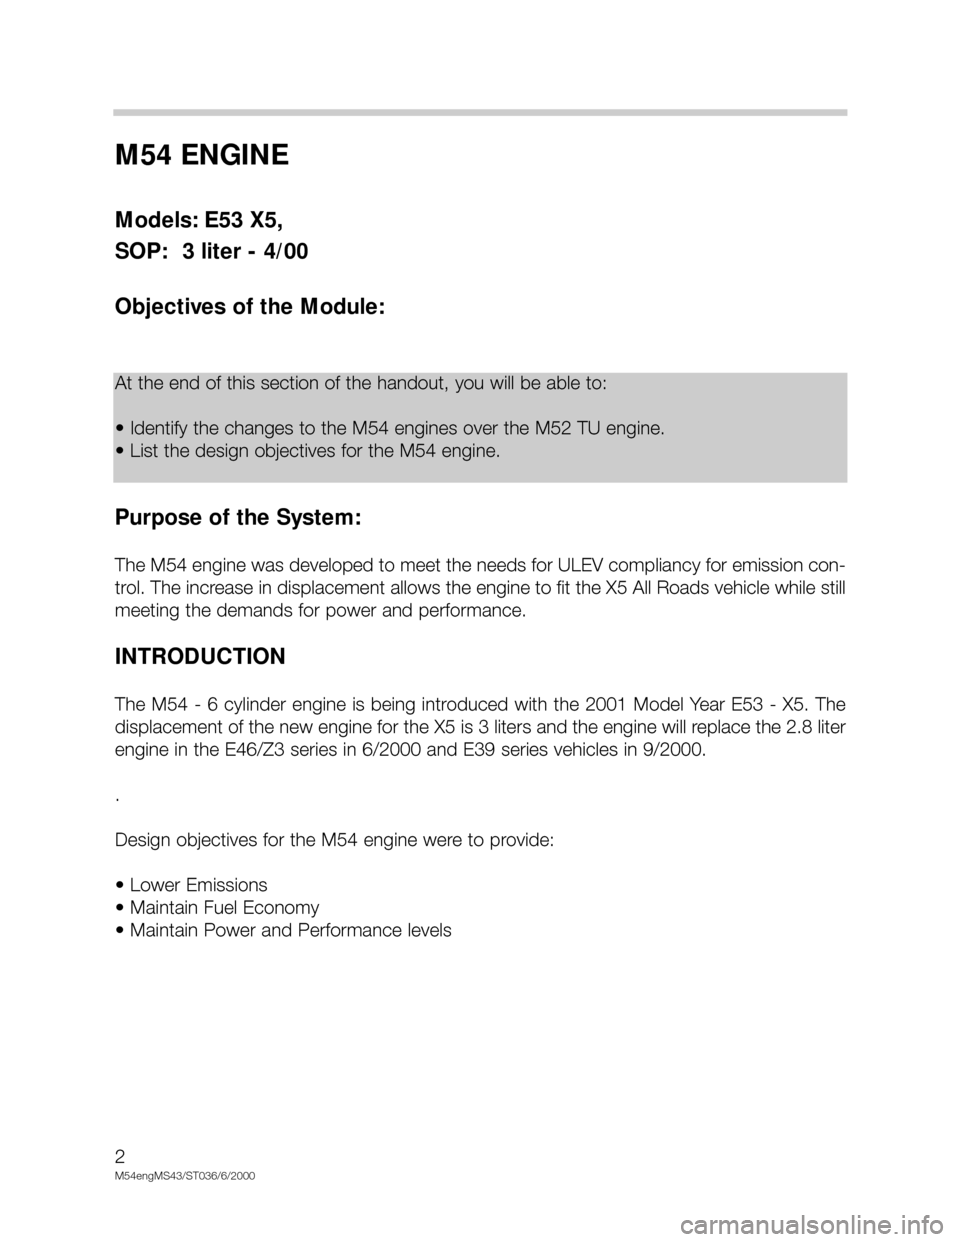 BMW X5 2006 E53 M54 Engine Workshop Manual M54 ENGINE 
Models: E53 X5, 
SOP:  3 liter - 4/00
Objectives of the Module:
Purpose of the System:
The M54 engine was developed to meet the needs for ULEV compliancy for emission con-
trol. The increa